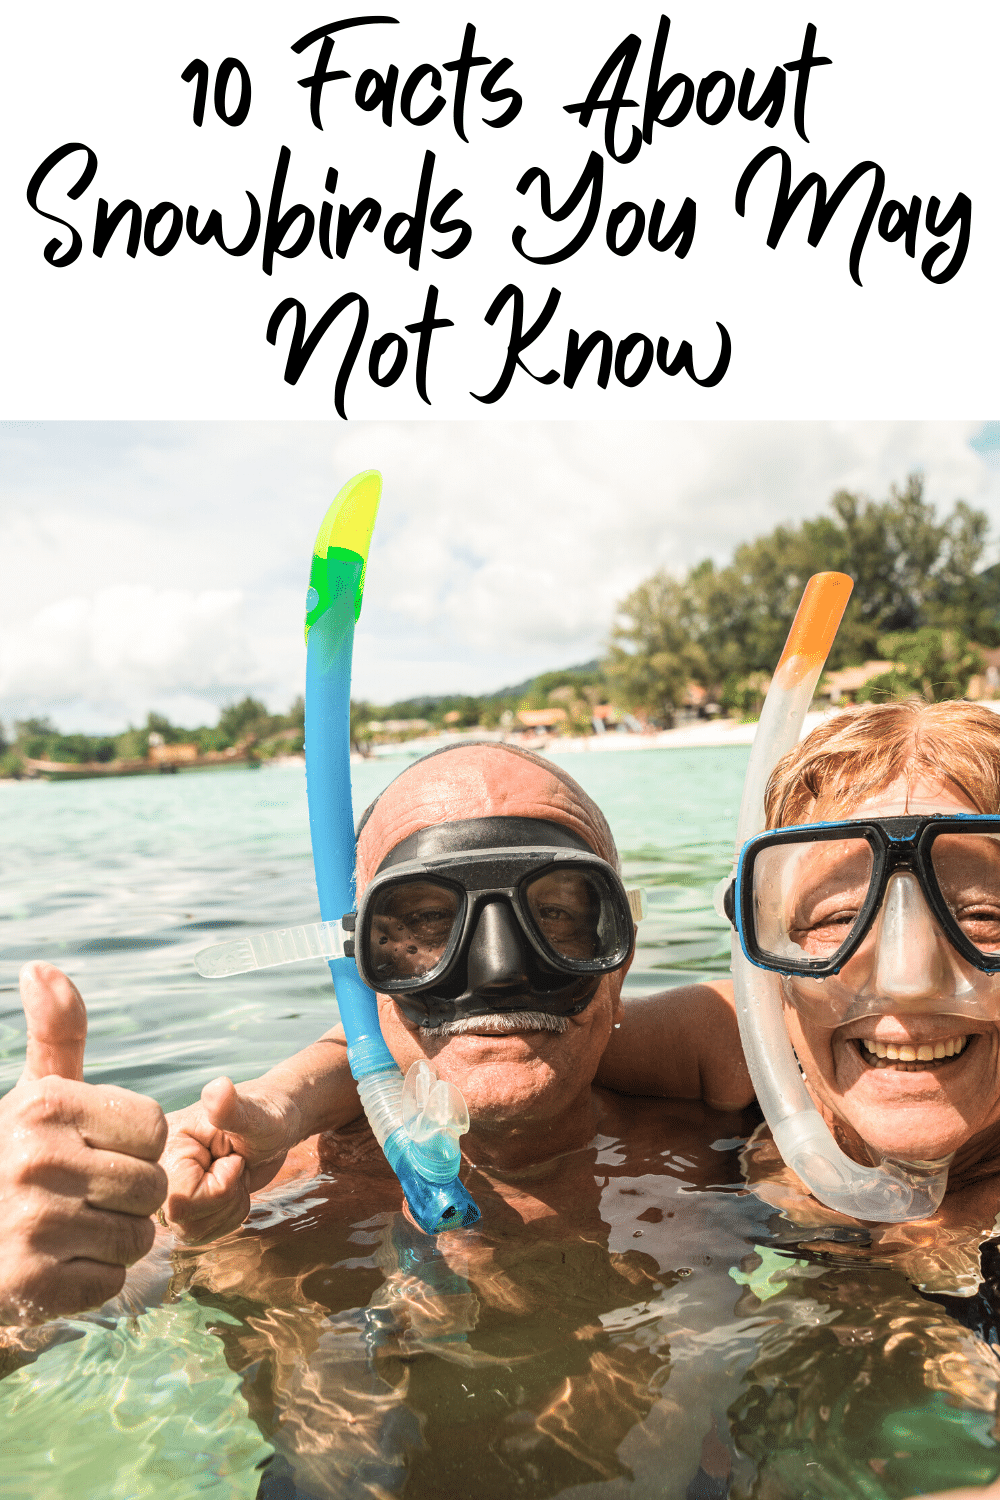 Do you know about snowbirds? They're not birds...they're people! Snowbirds are people, generally baby boomers, who migrate with the seasons. They usually head south for the winter and then they head back north for the summers! They get the best of both worlds and the best weather year round!